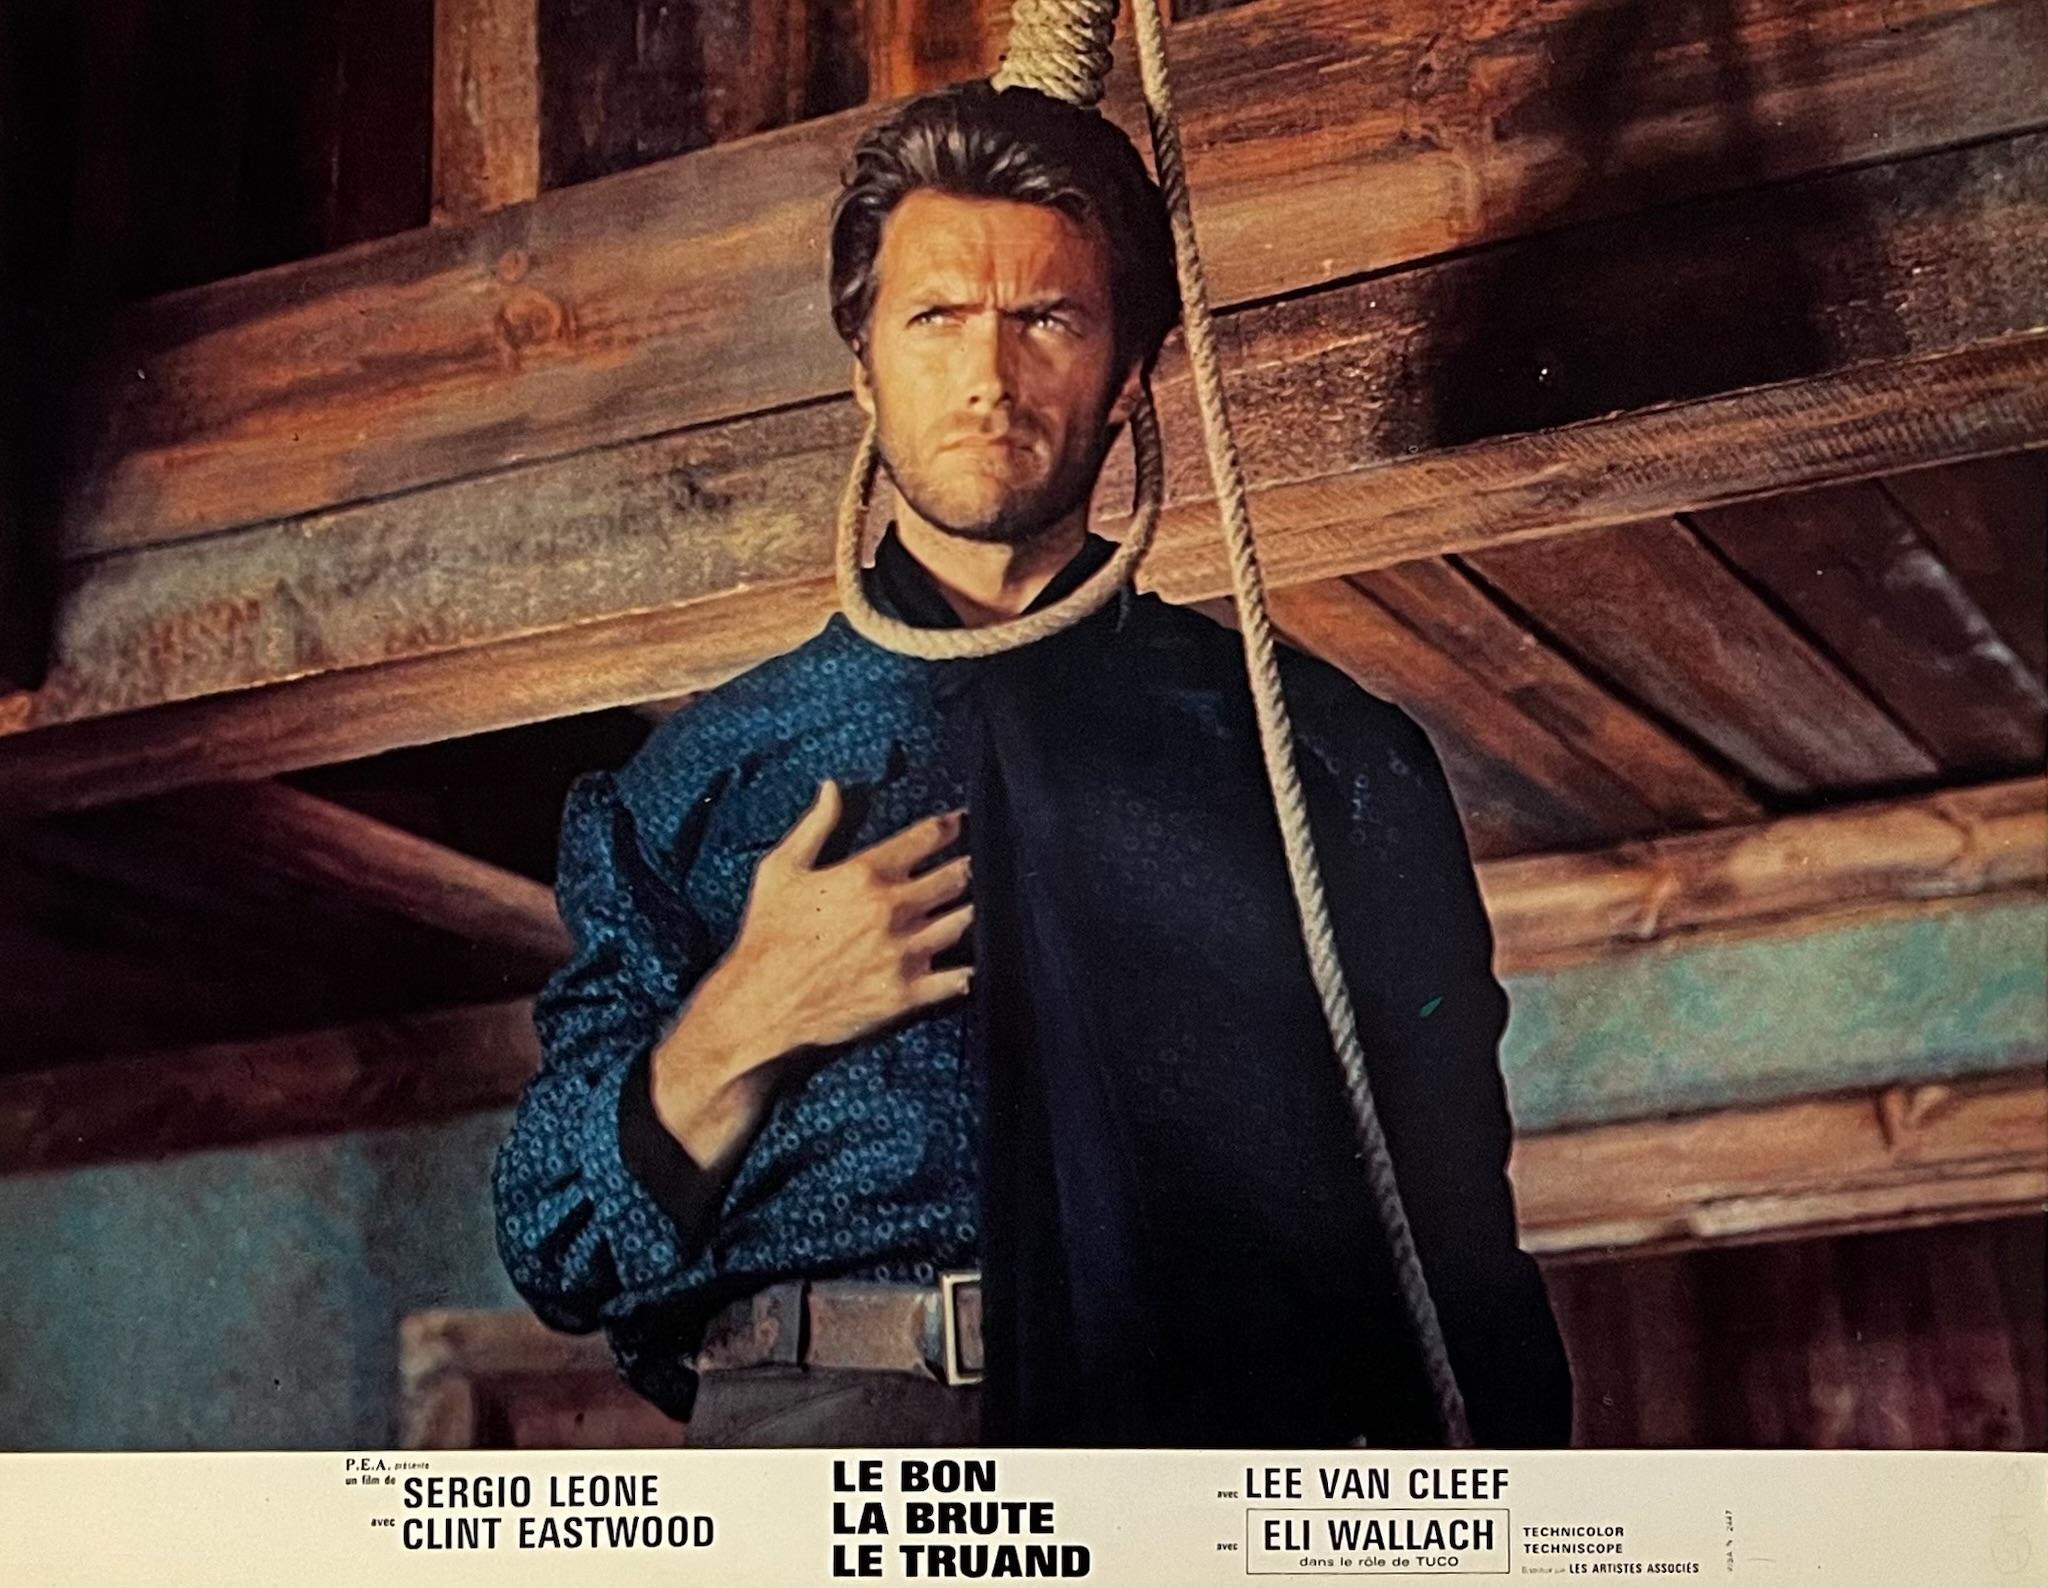 Unknown Figurative Print – Clint Eastwood The Good The Bad The Bad The Ugly - Original 1966 Französische Lobby Card  